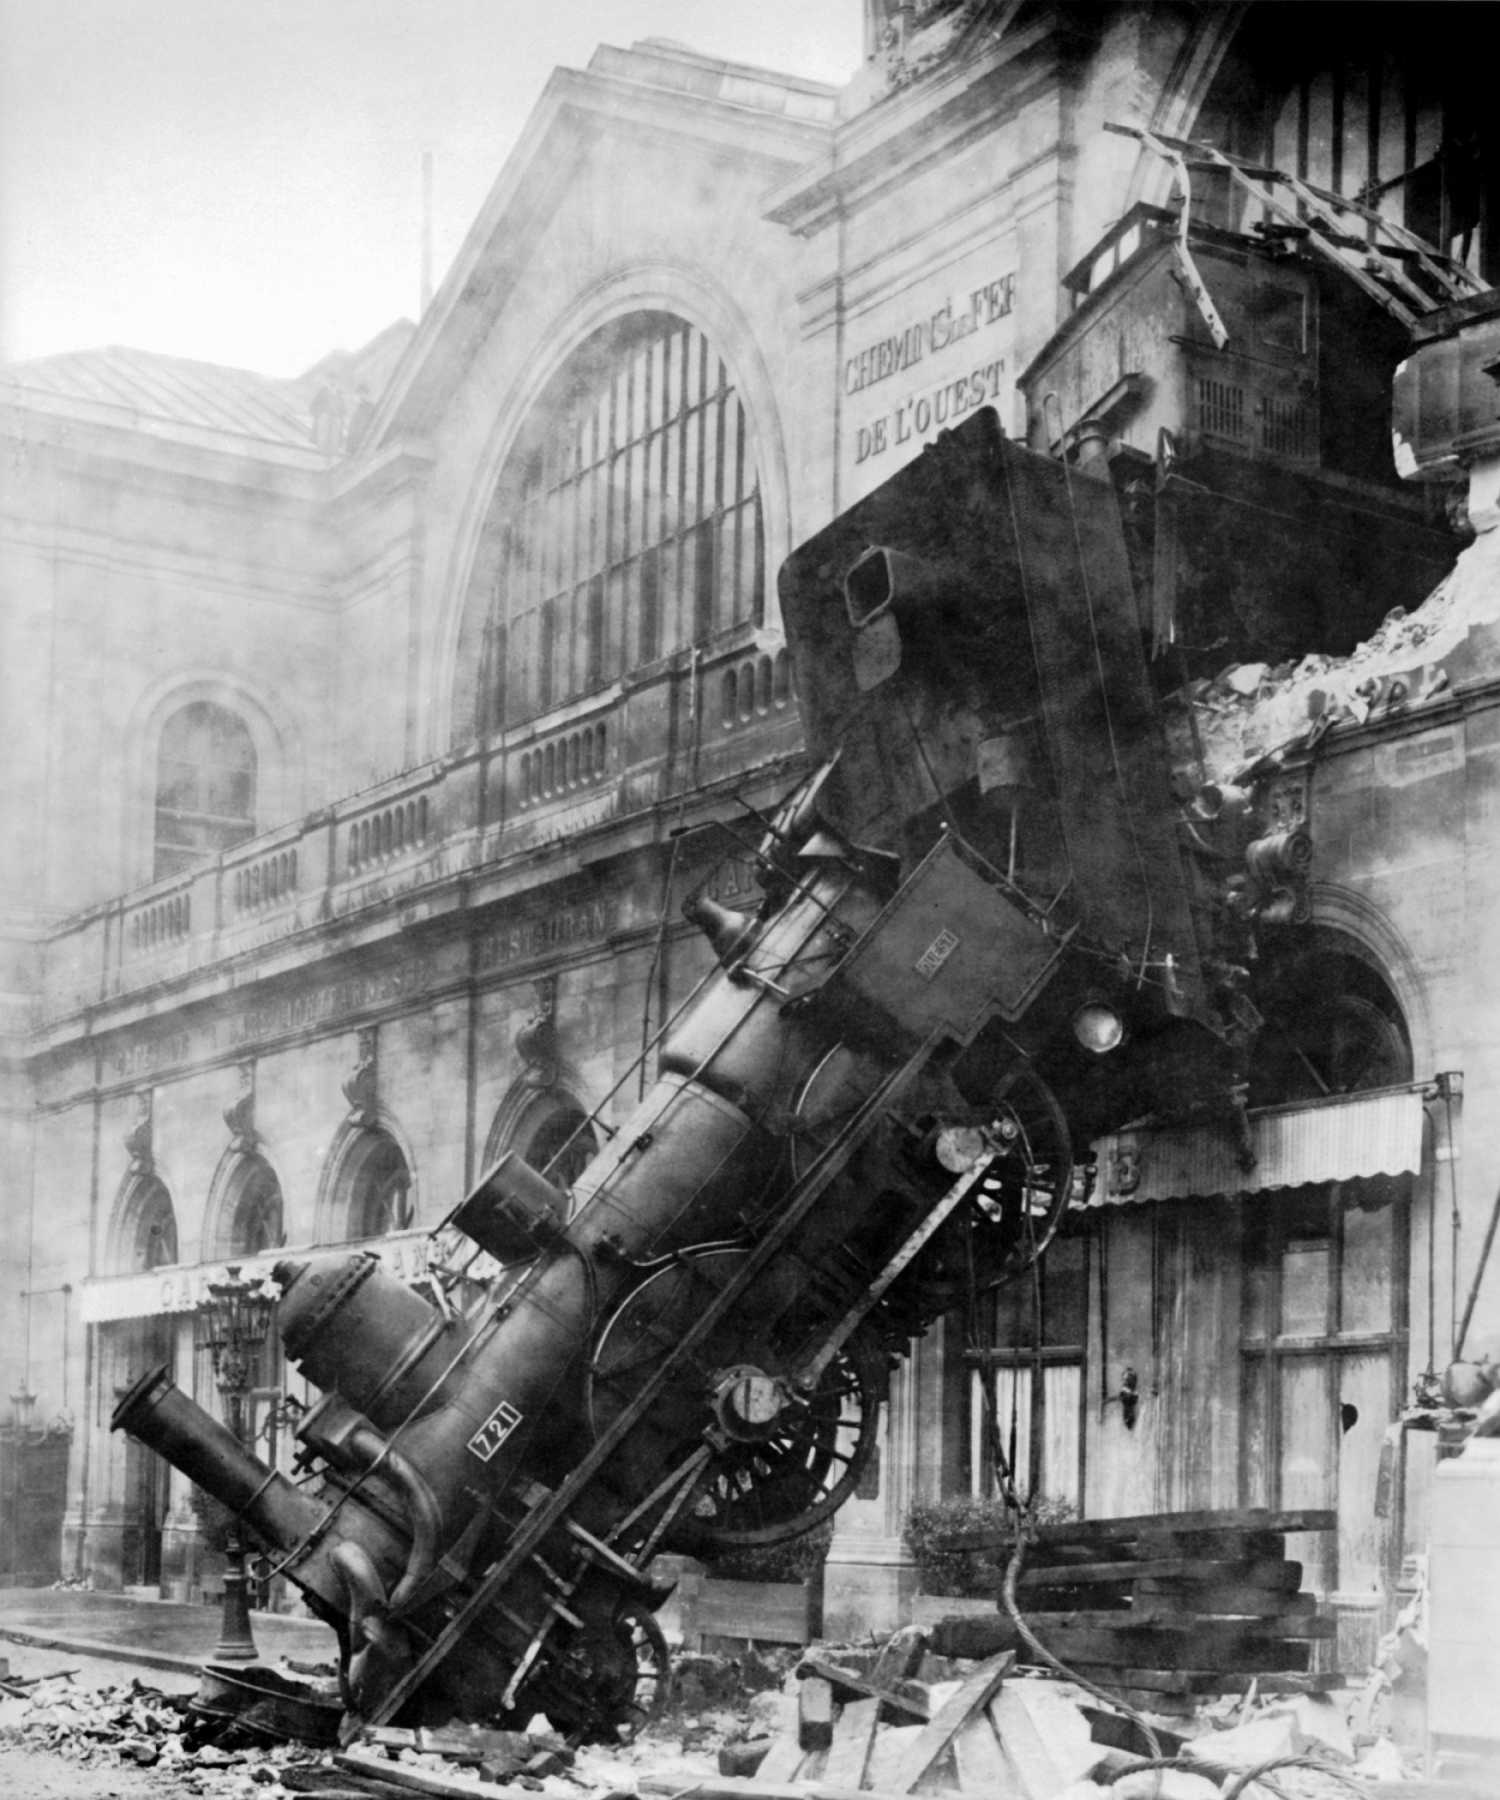 The iconic image of the Montparnasse derailment where the train was several minutes late and the driver trying to make up for lost time, entered the station too fast and the train air brake failed to stop it. 